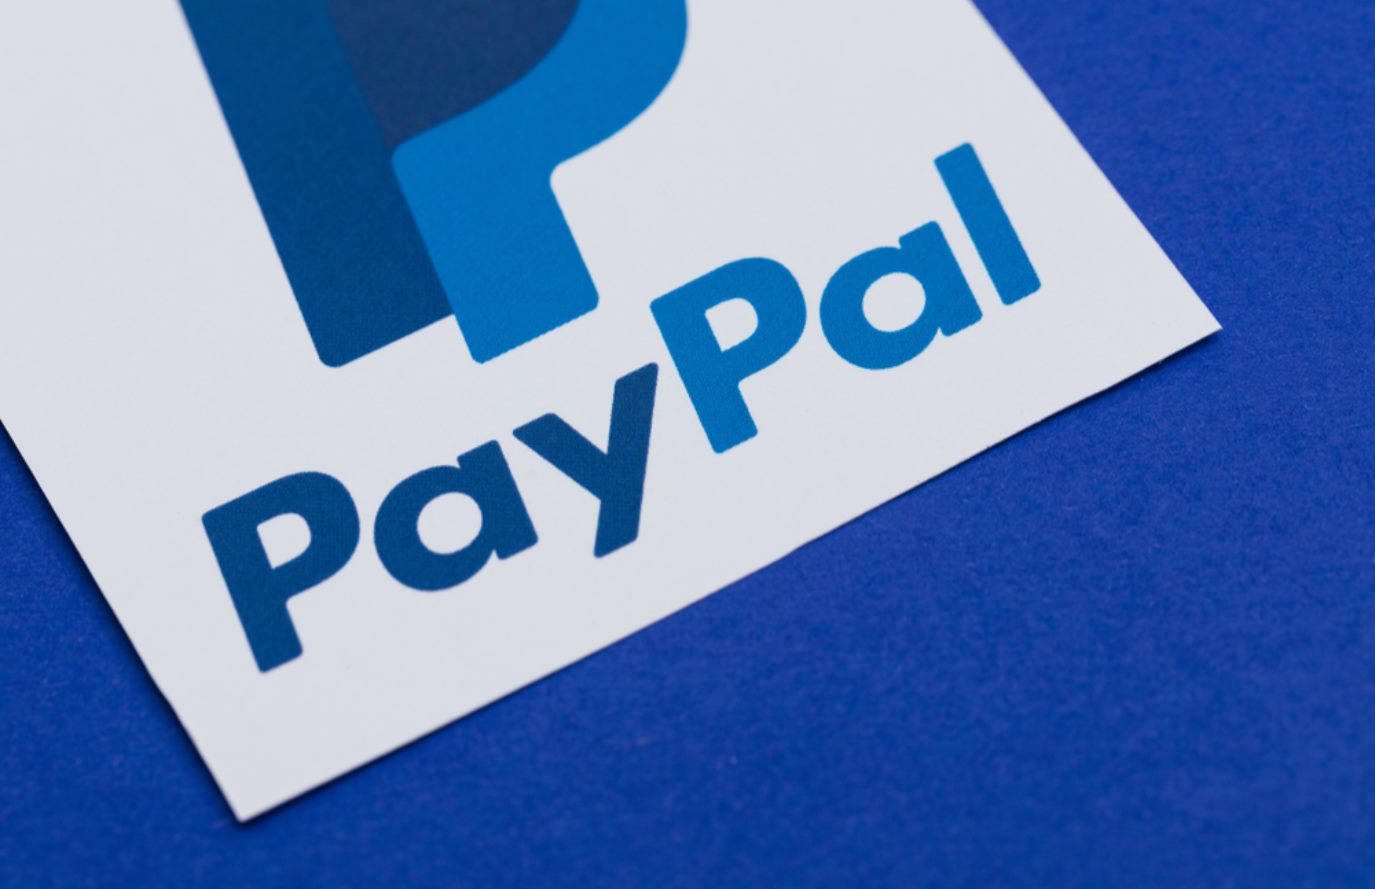 What Is PayPal